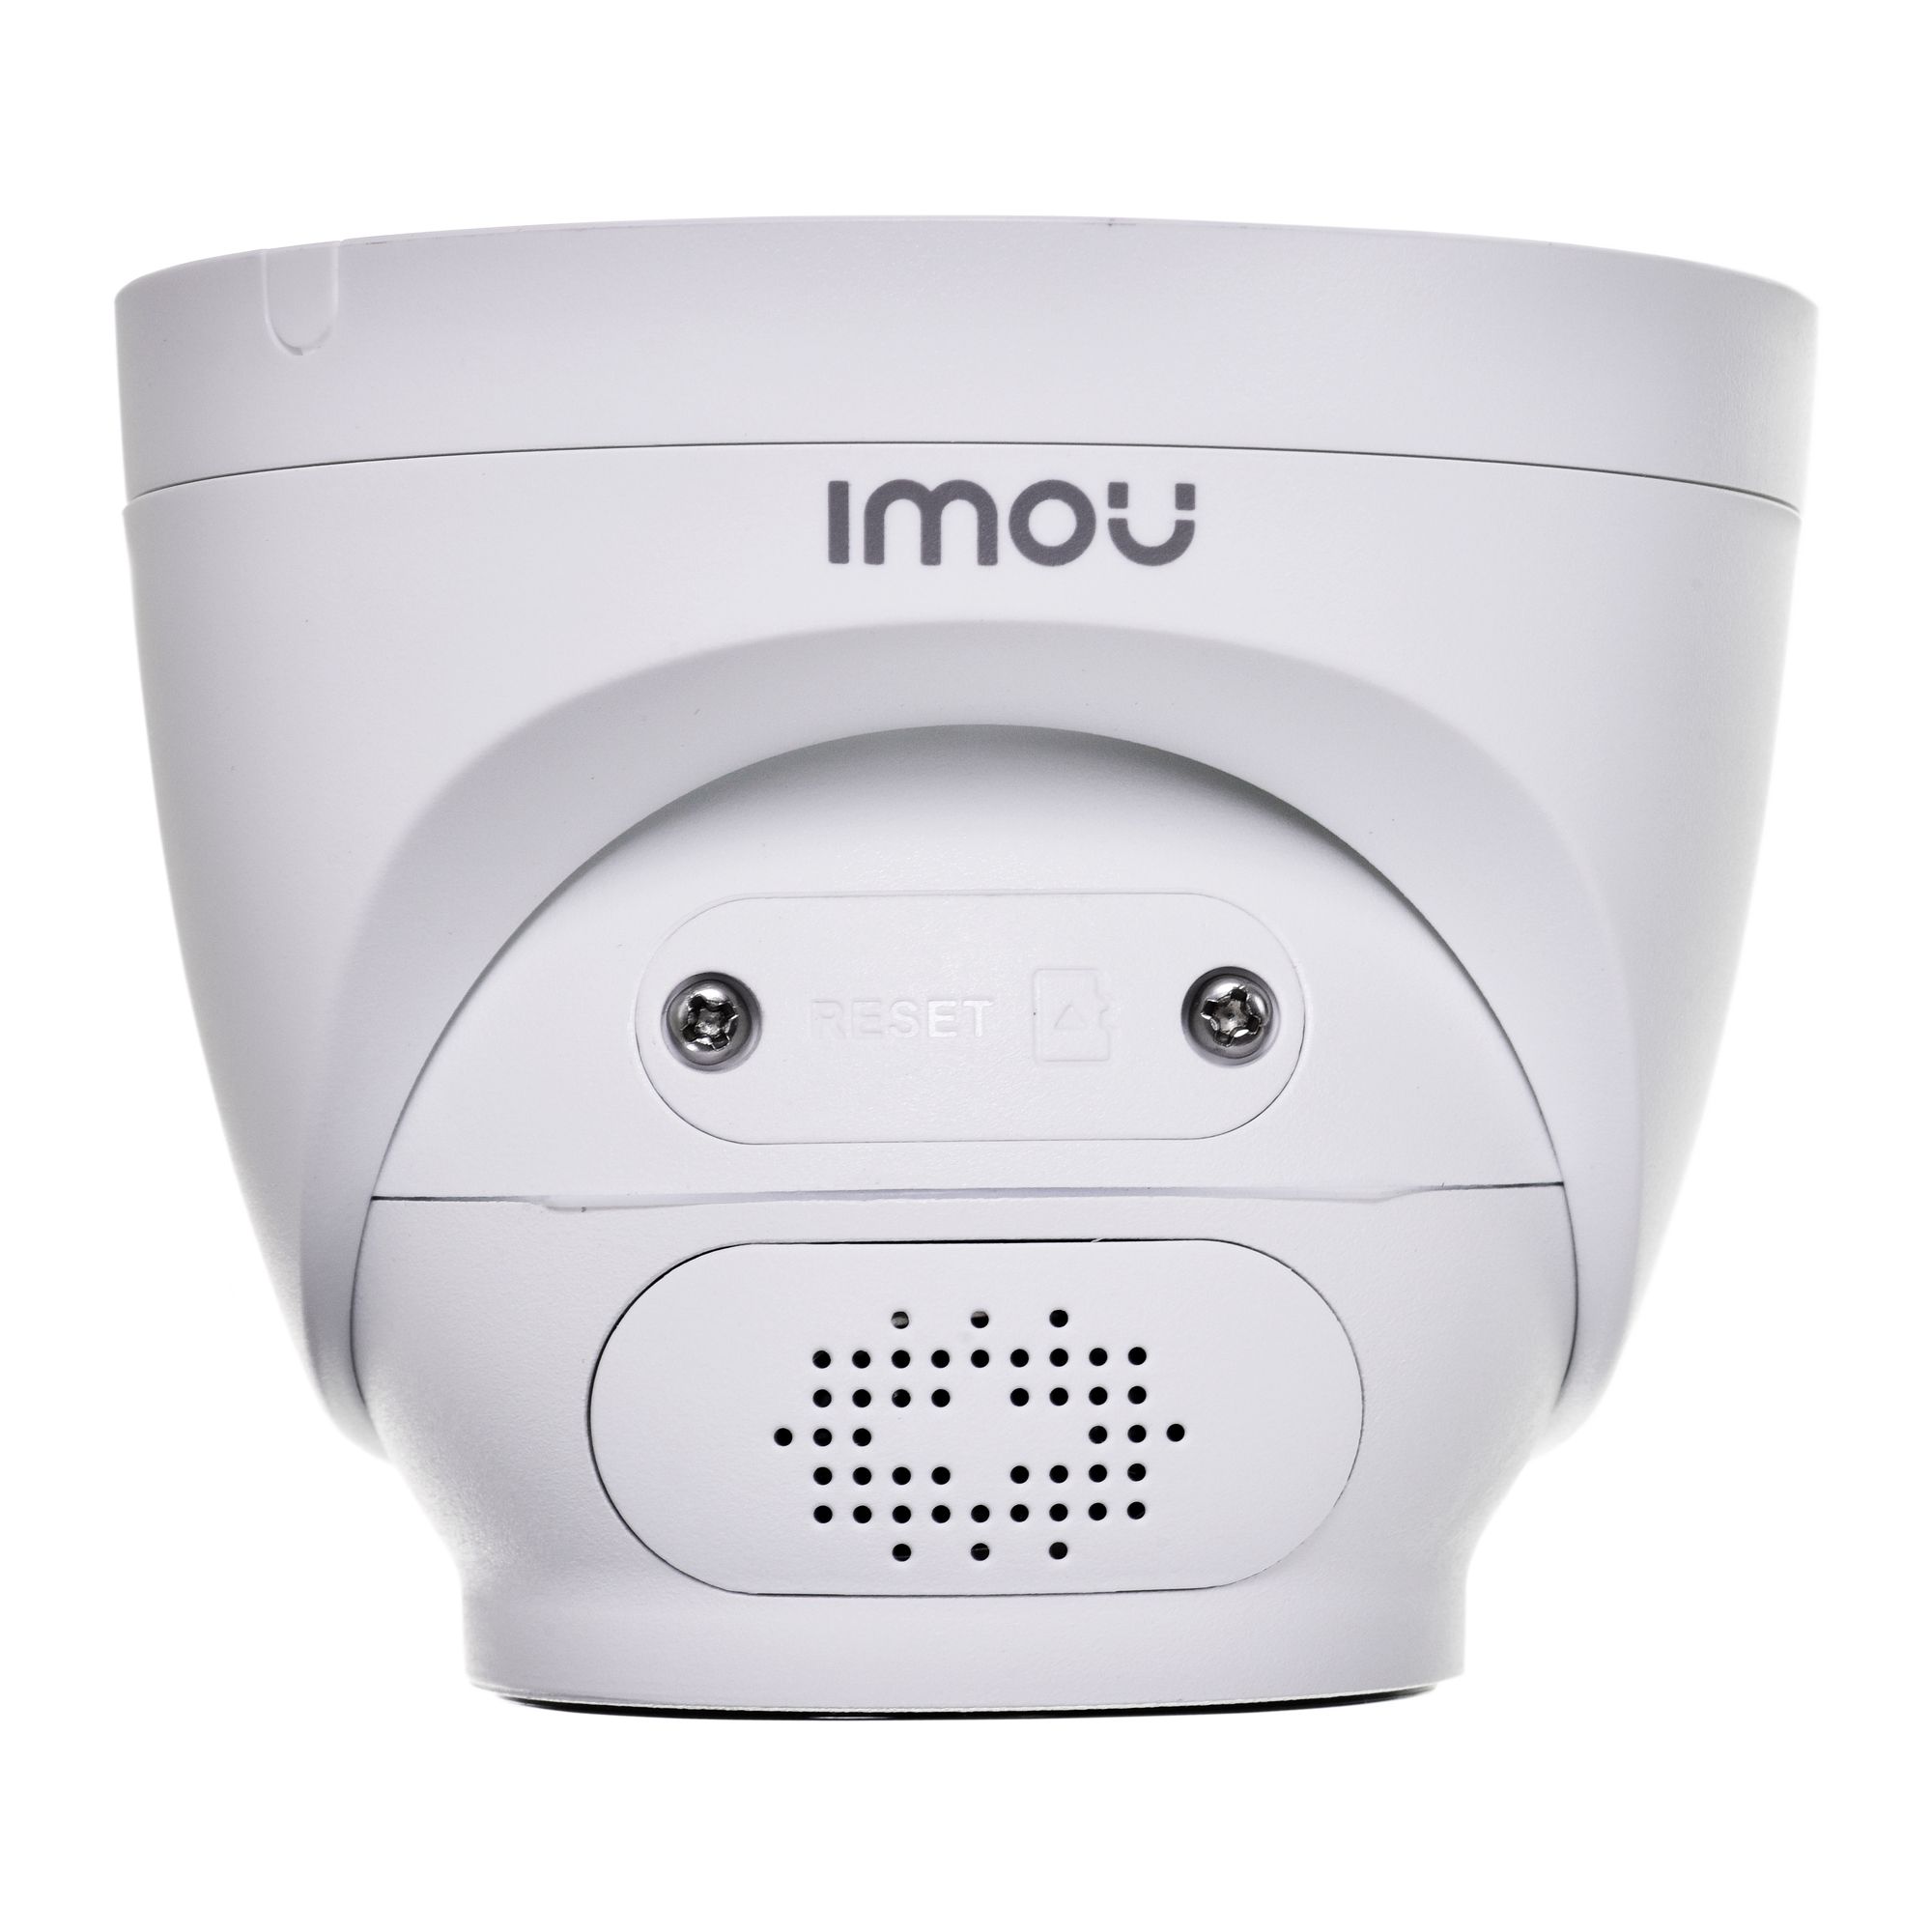 DAHUA IMOU TURRET IPC-T26EP IP security camera Outdoor Wi-Fi 2Mpx H.265 White, Black_3